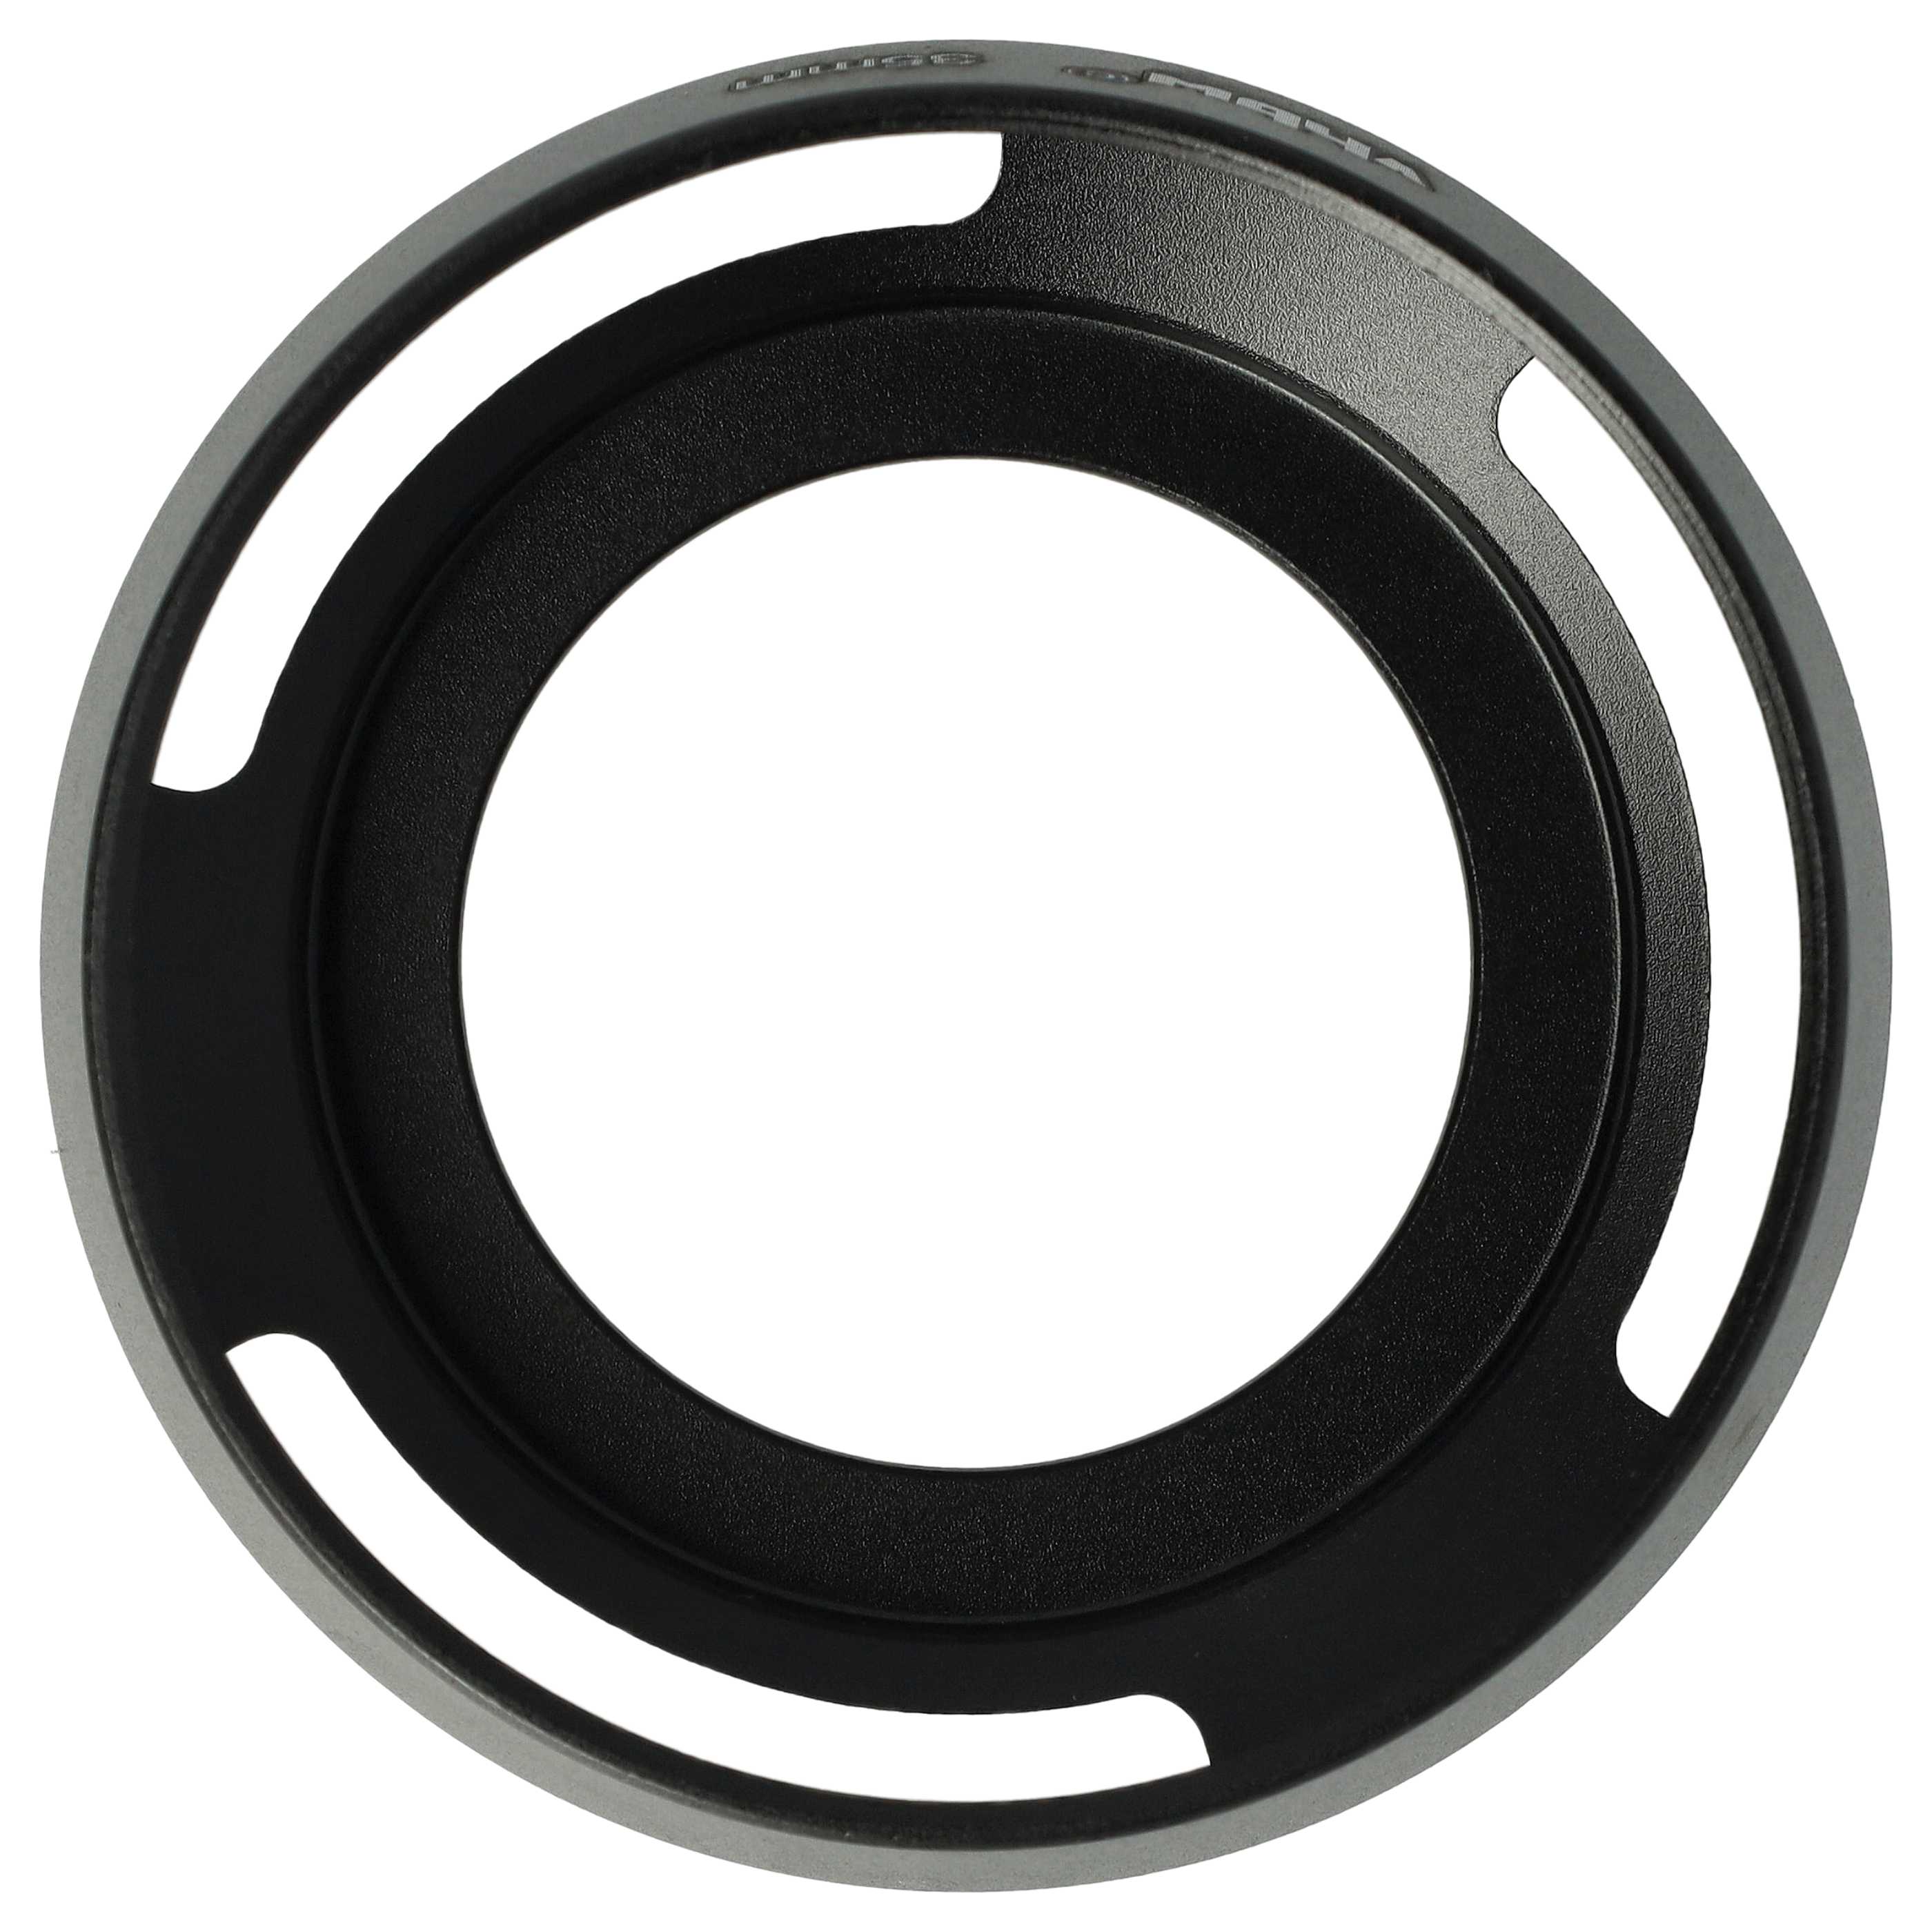 Lens Hood suitable for 35mm Lens - Lens Shade, with Filter Thread (51 mm) Black, Round, with Recesses